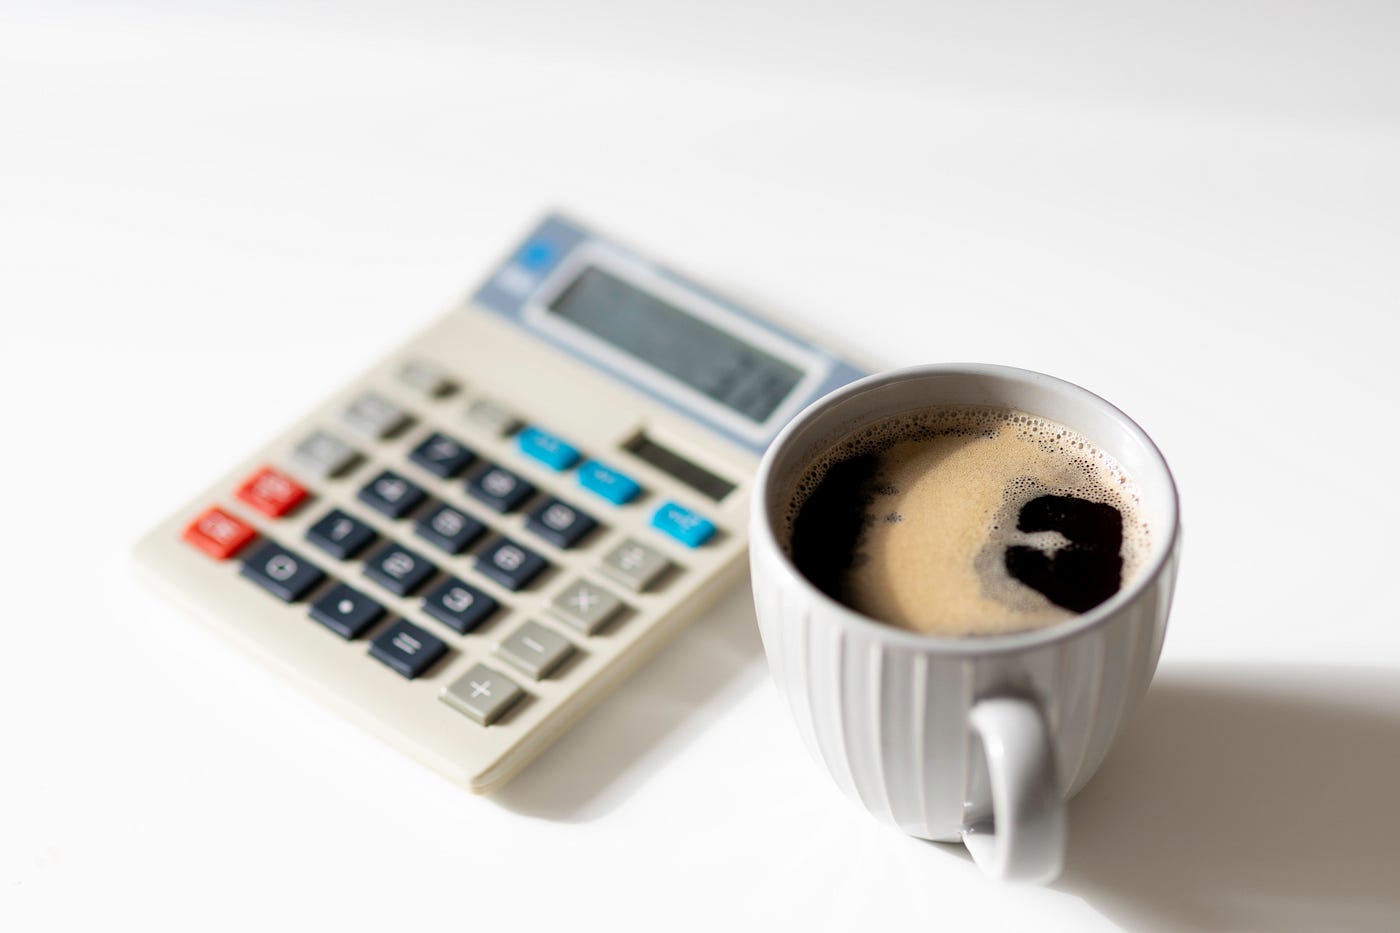 A calculator and a cup of coffee sit side-by-side.